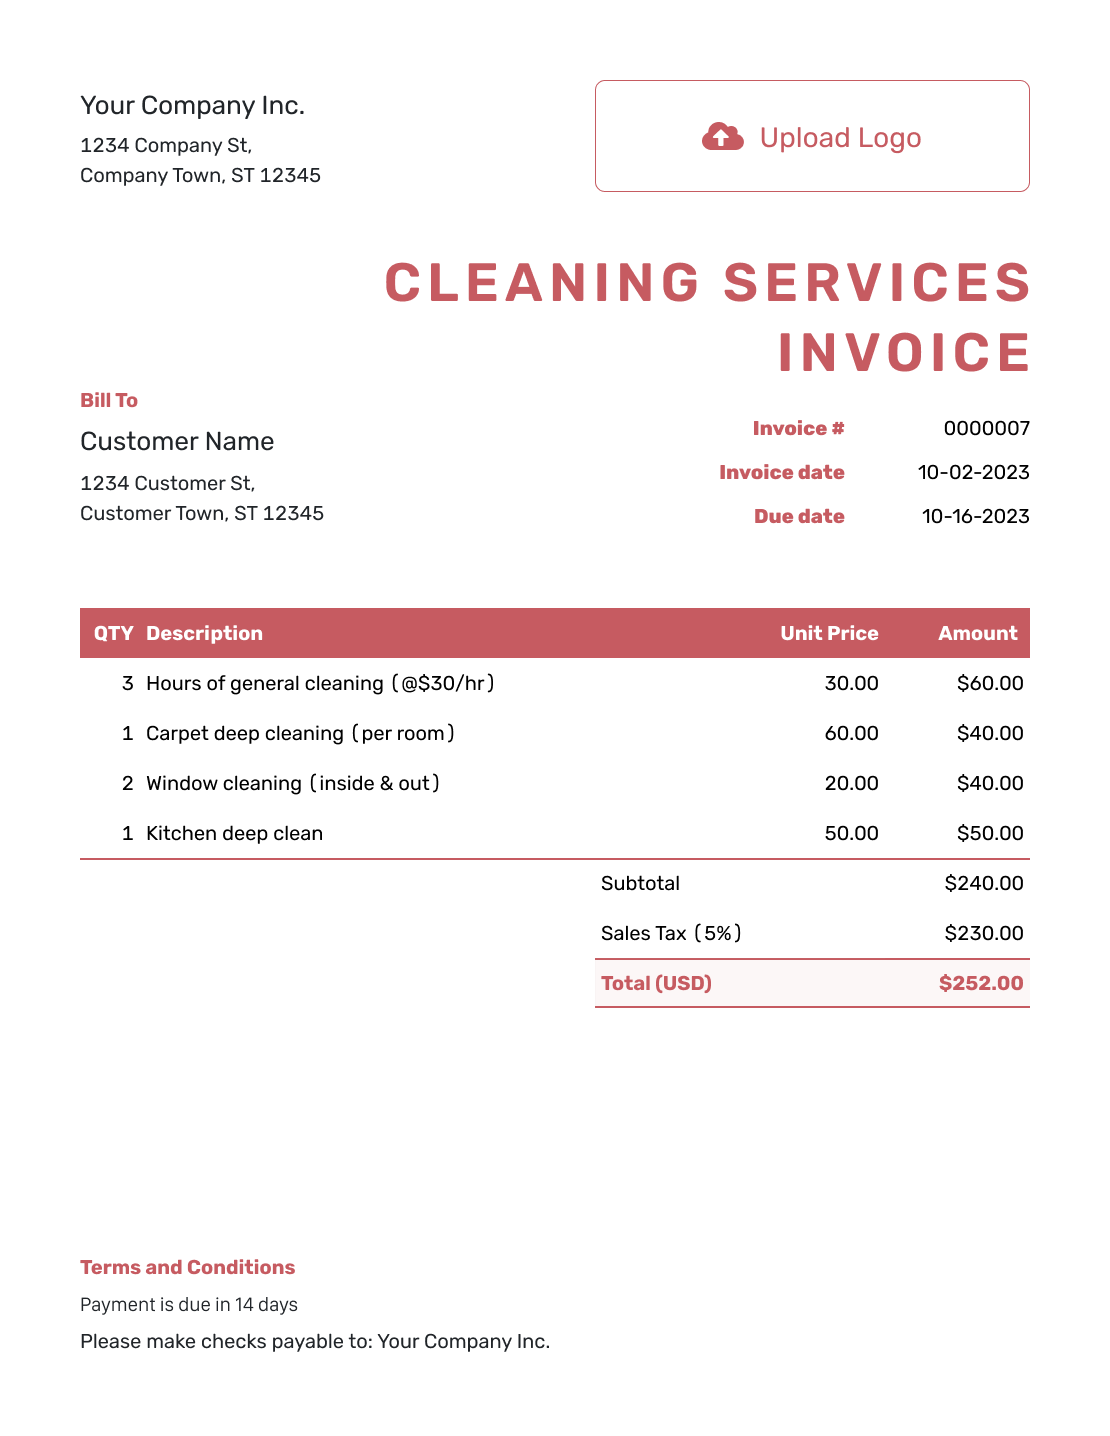 Itemized Cleaning Services Invoice Template